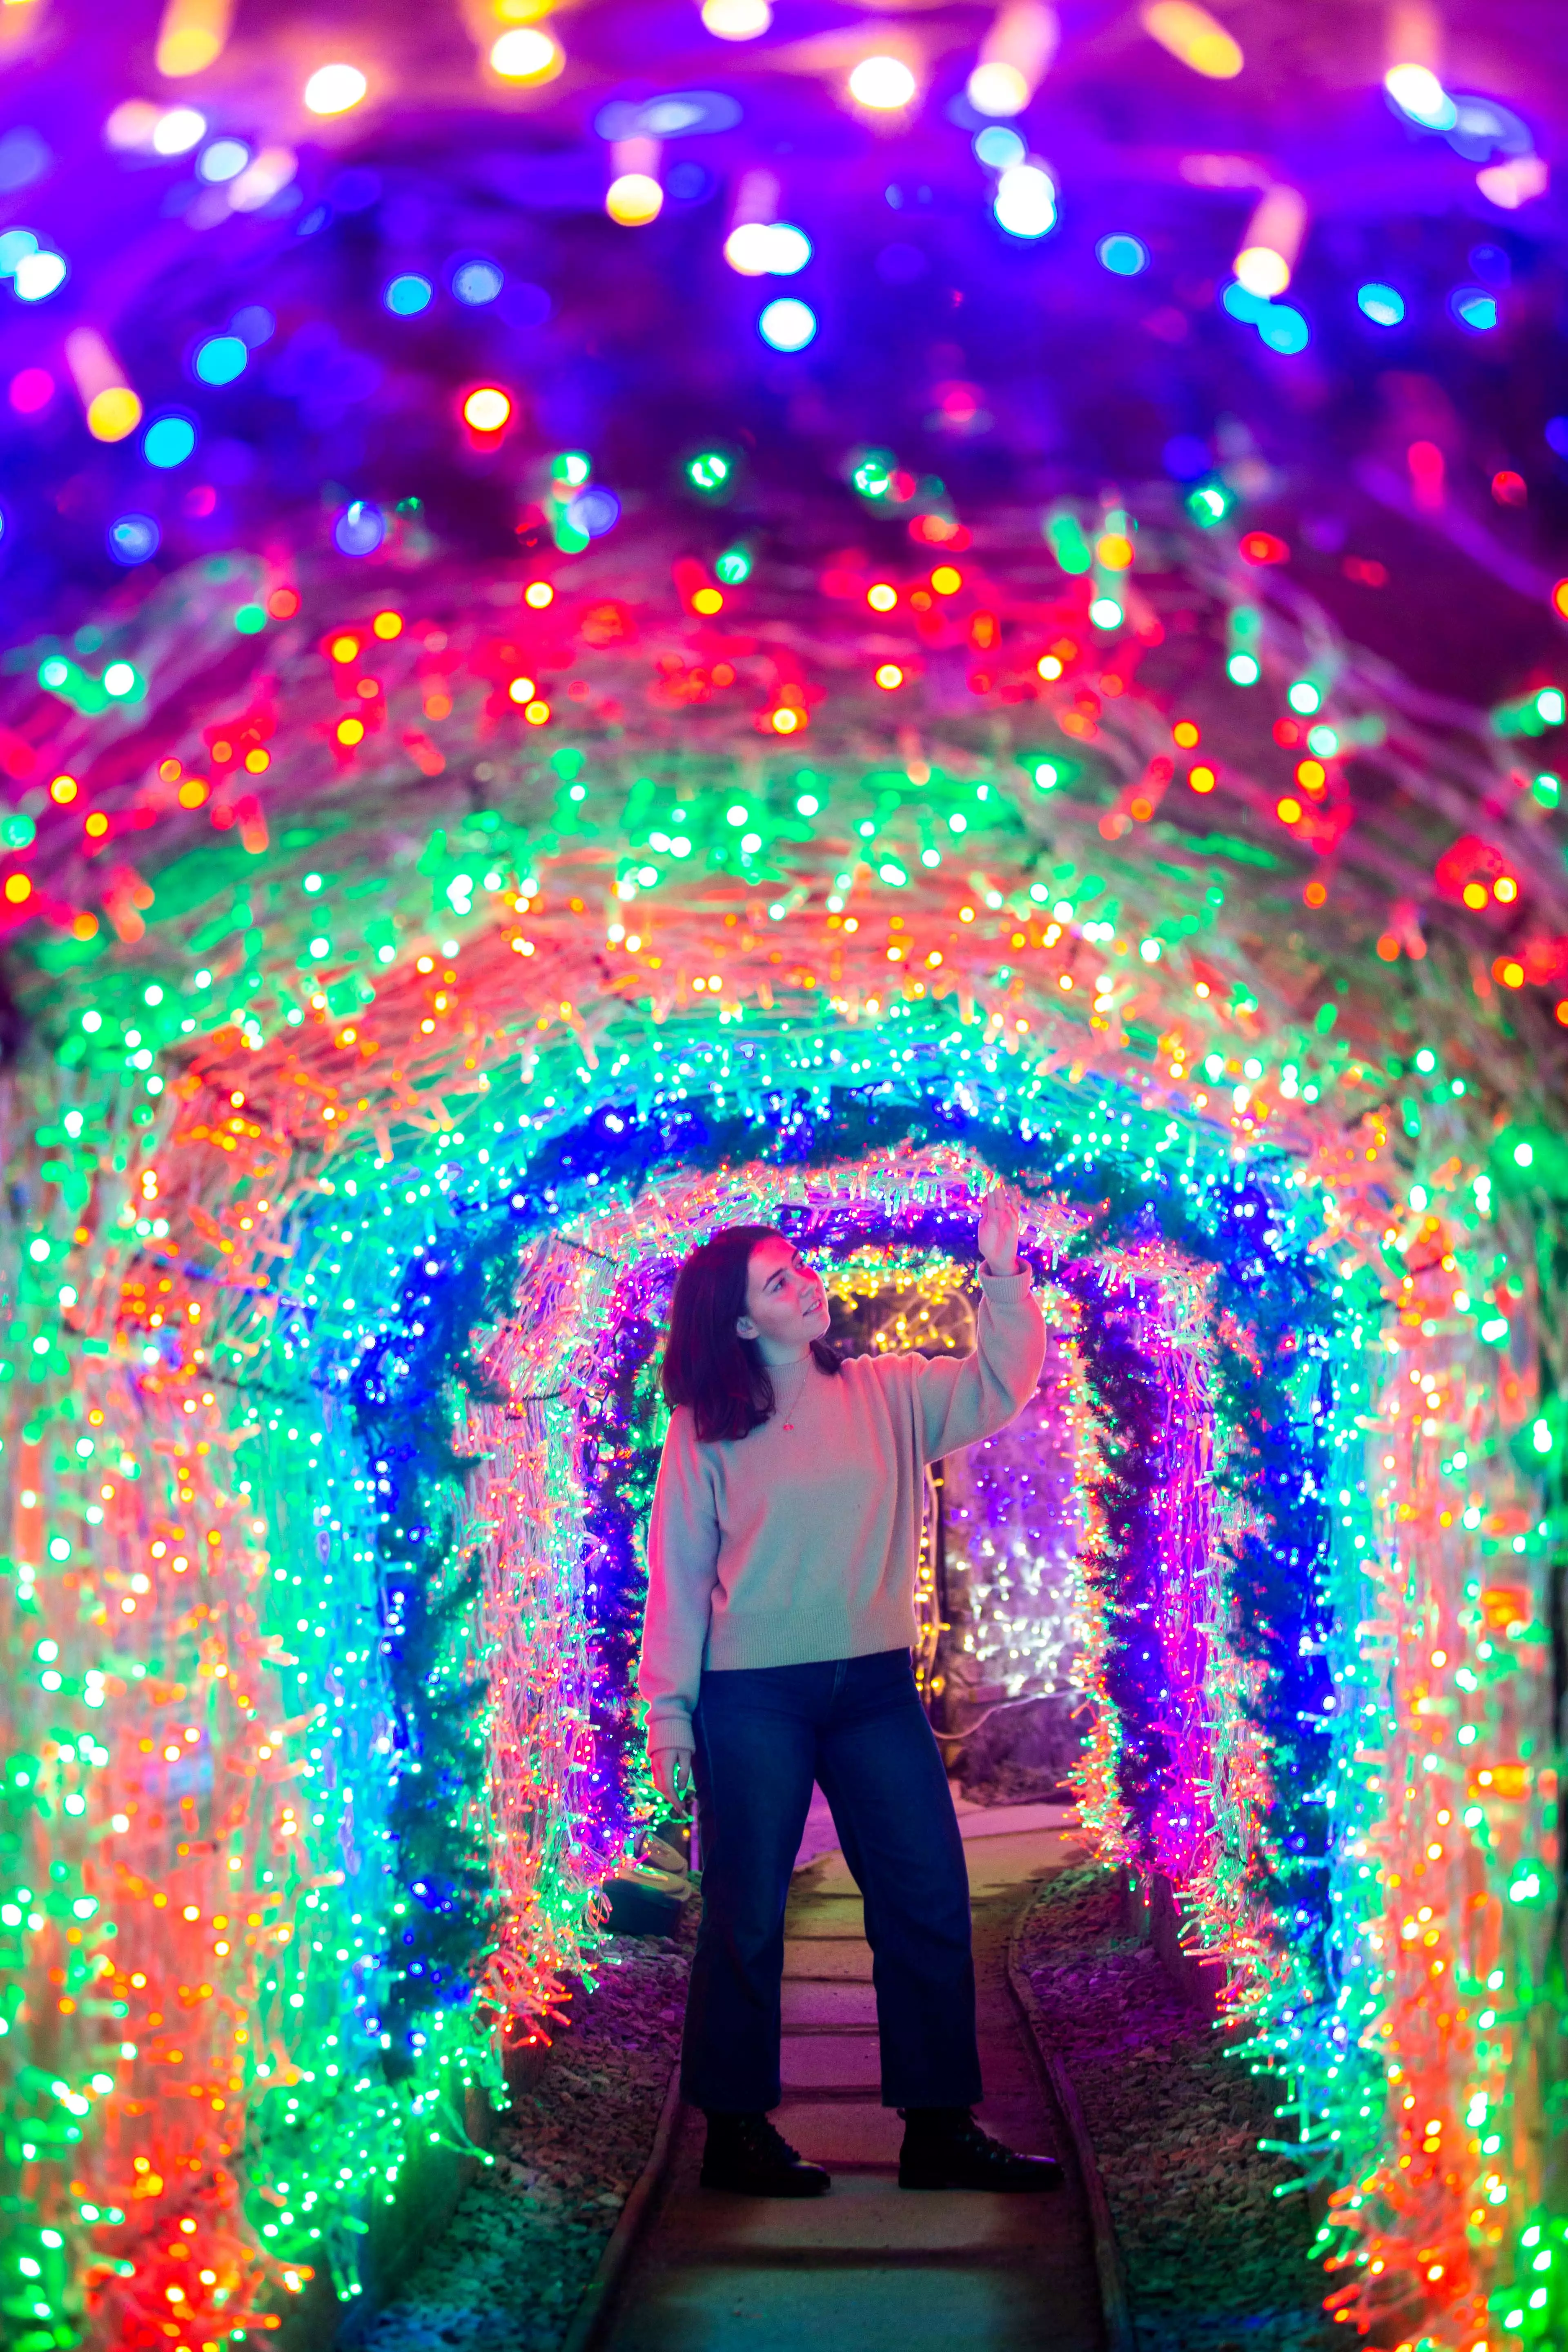 The 110-metre-long tunnel is brightly decorated with an astounding 40,000 multi-colour lights (